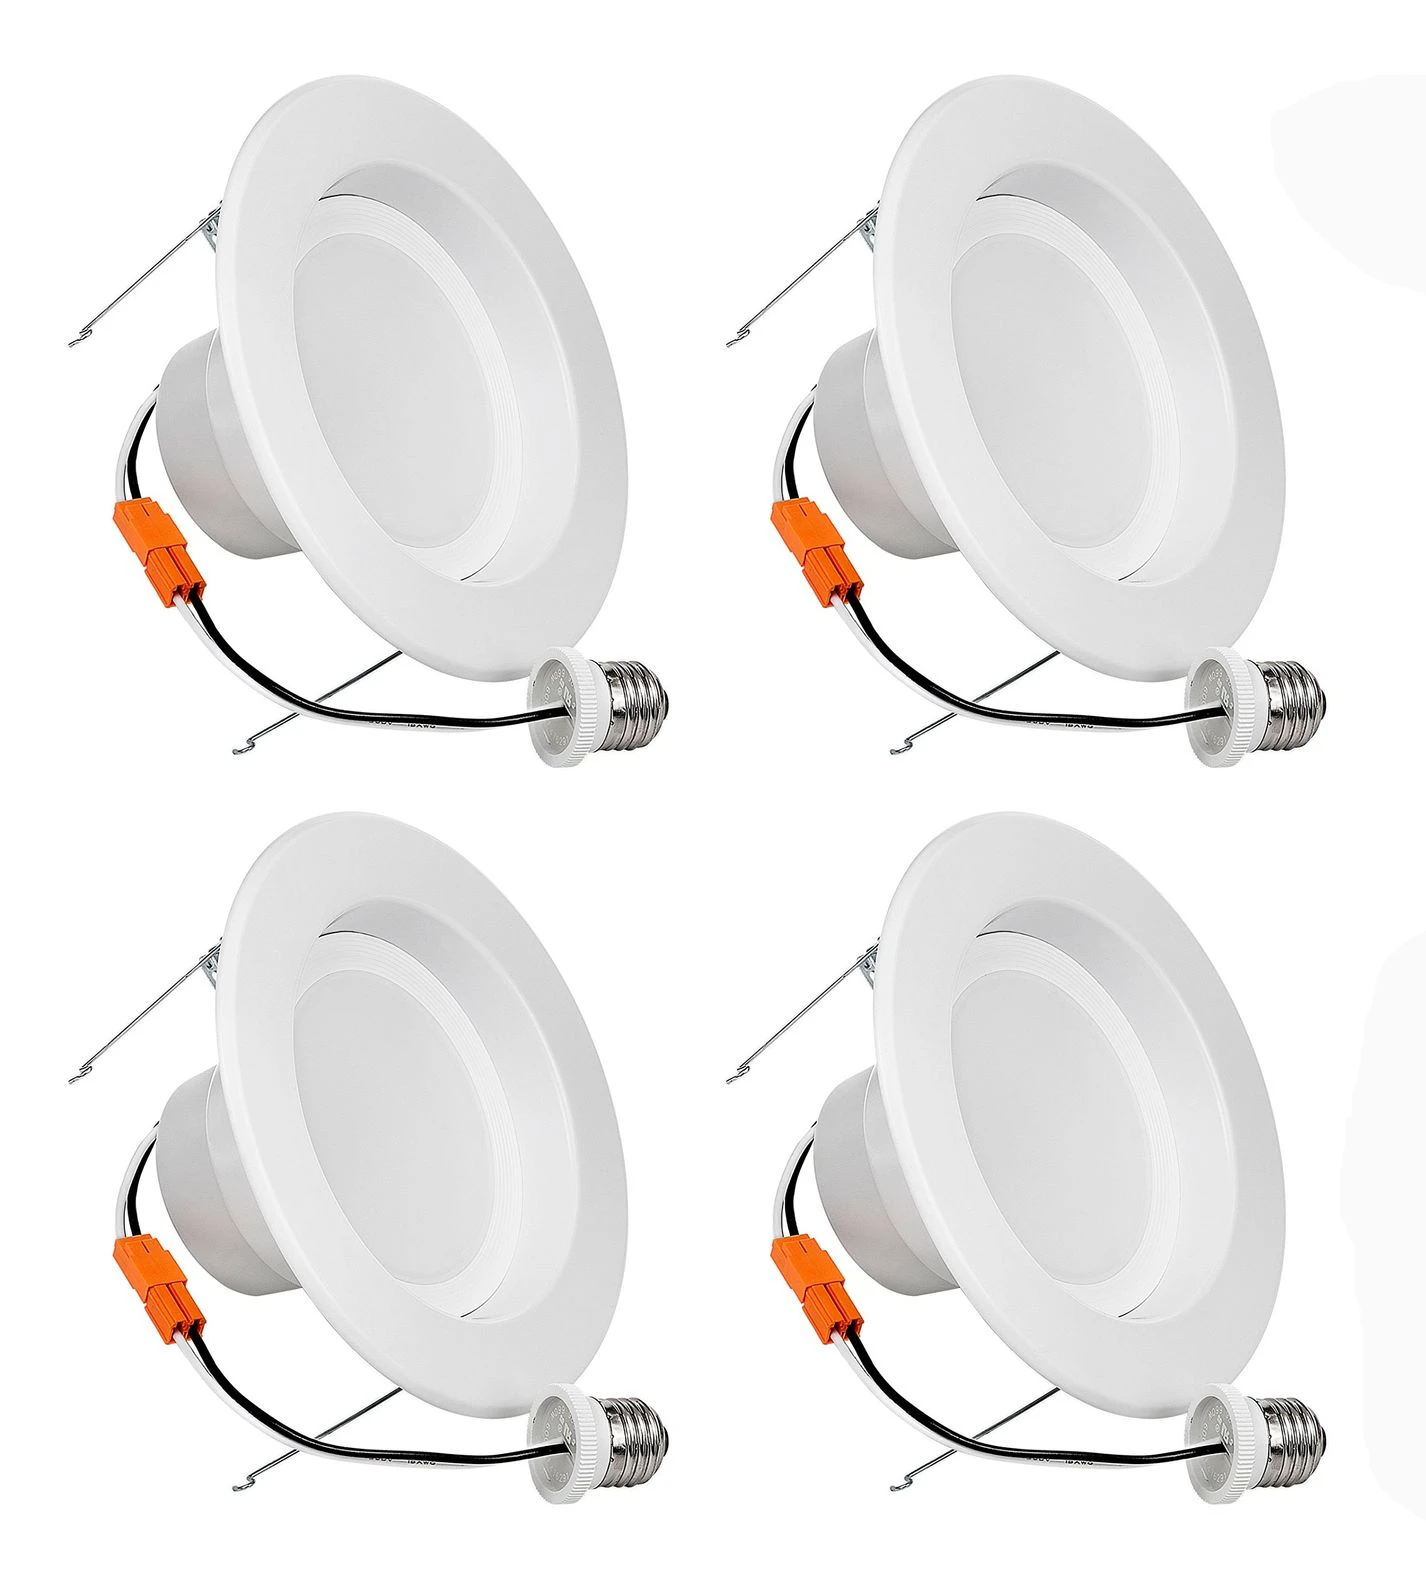 New Hot Sale 5/6inch dimmable SMD led Functional Retrofit kit Recessed led downlight